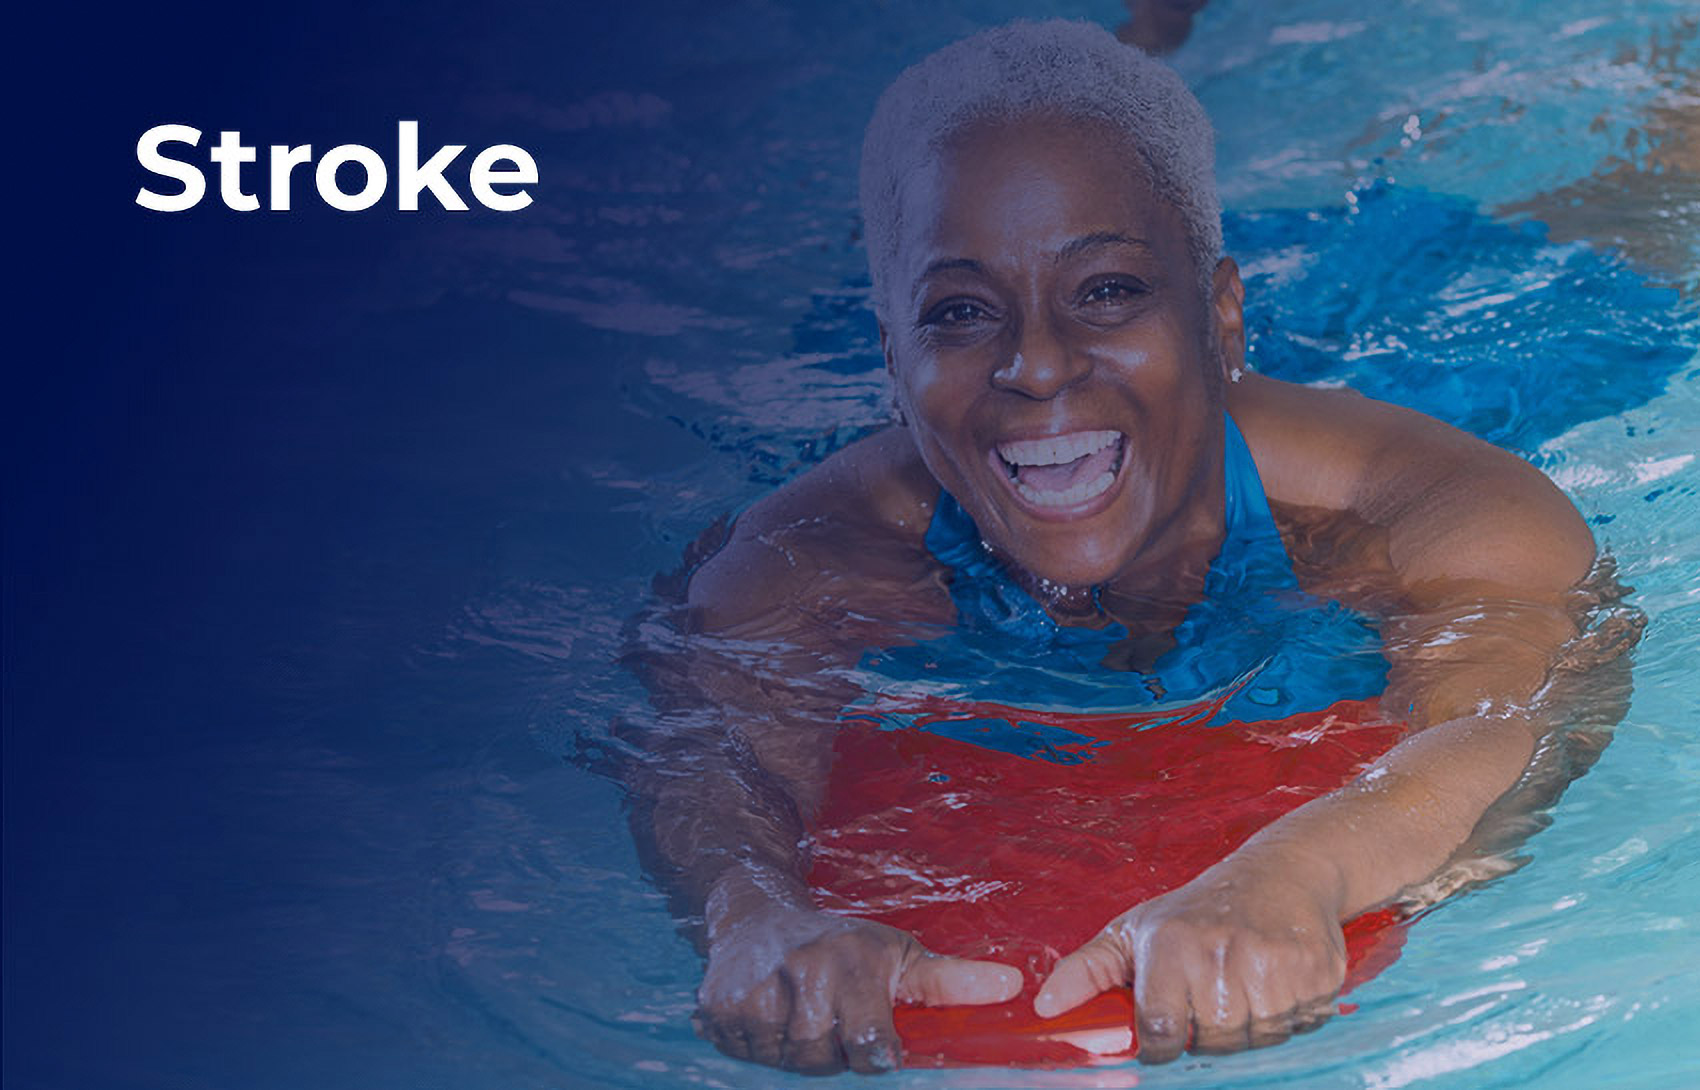 Smiling woman floating in pool holding kick board